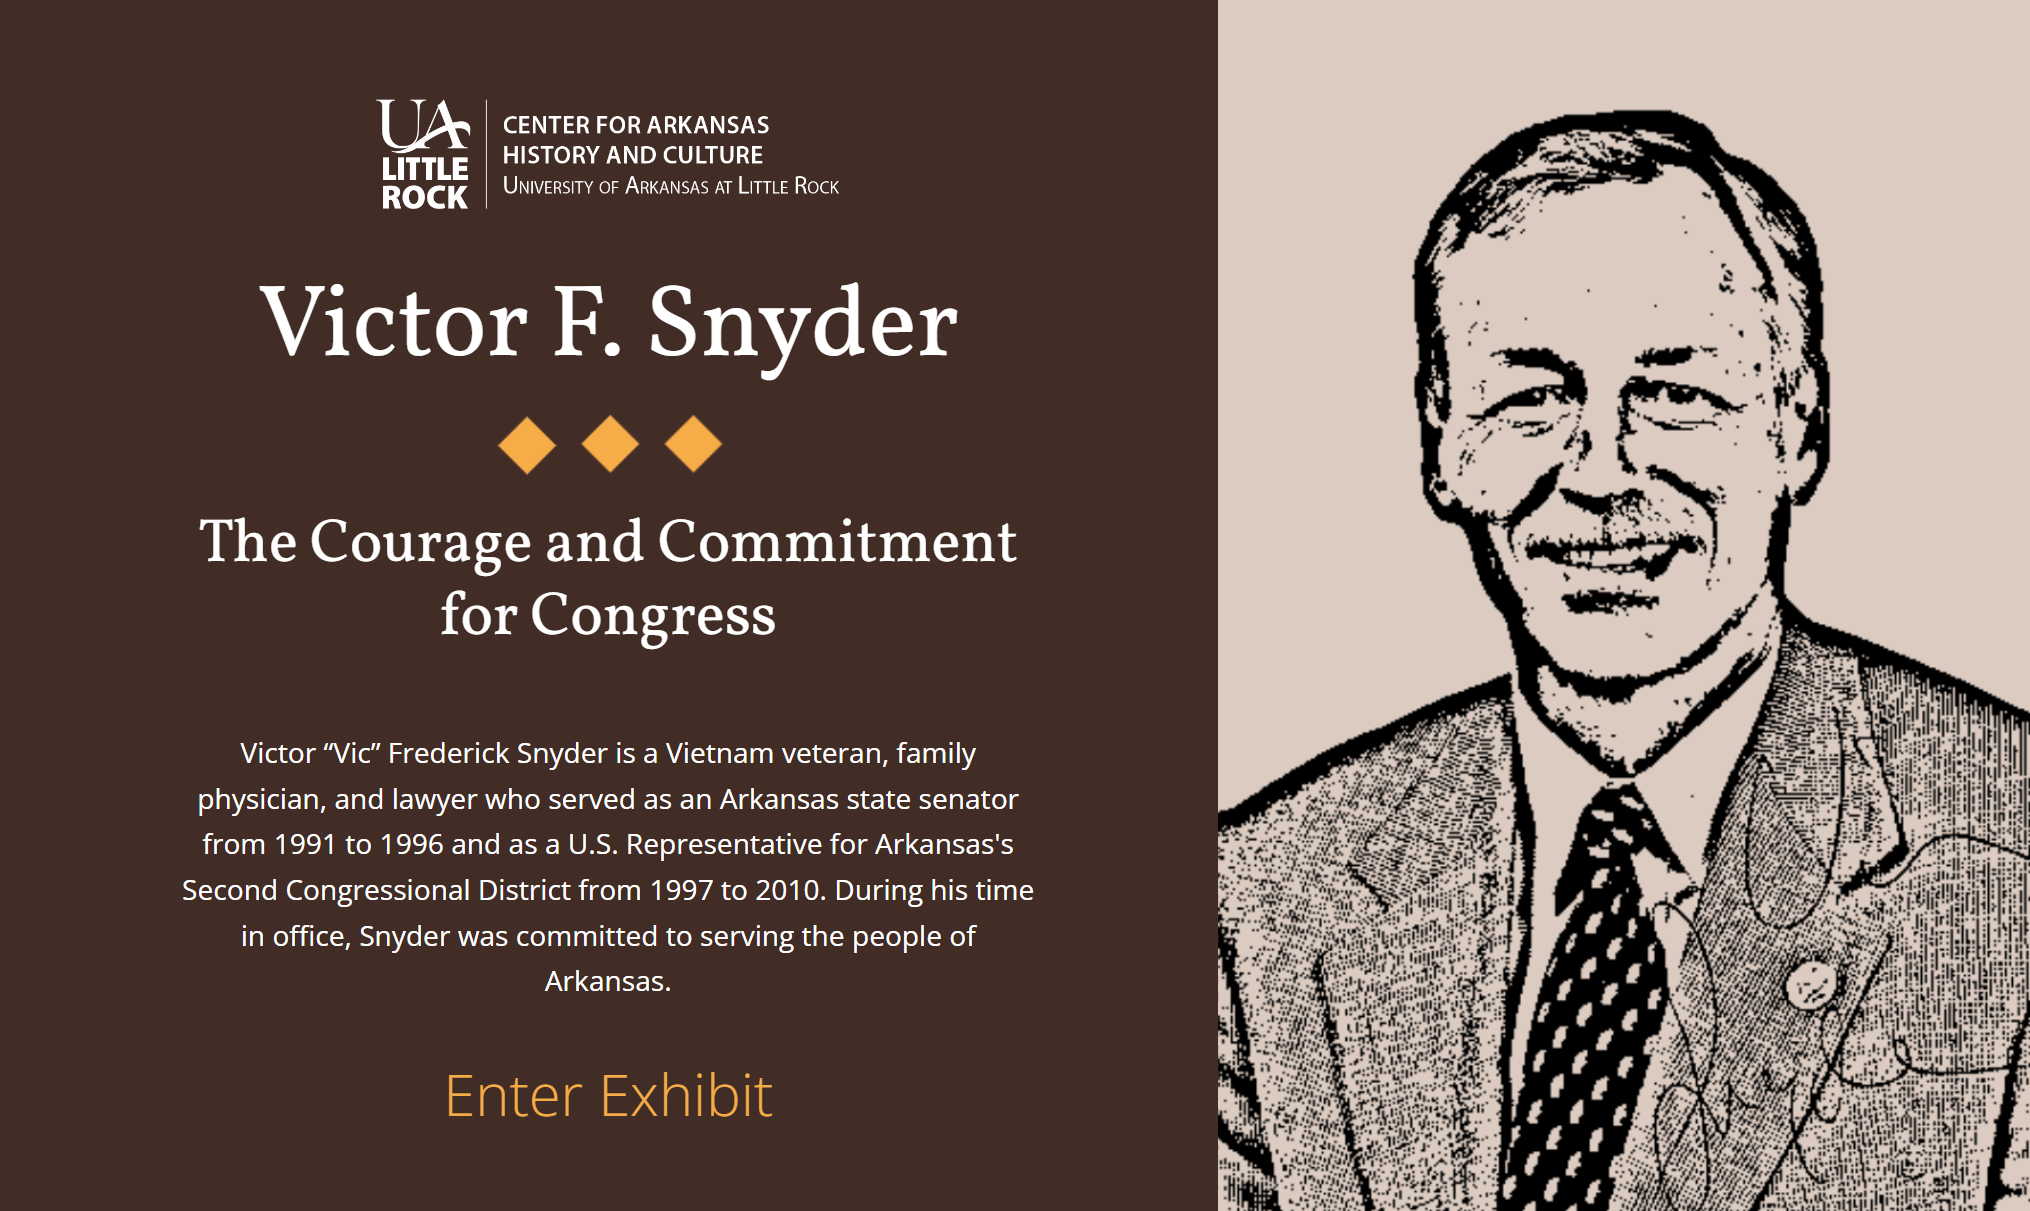 Victor F. Snyder: The Courage and Commitment for Congress